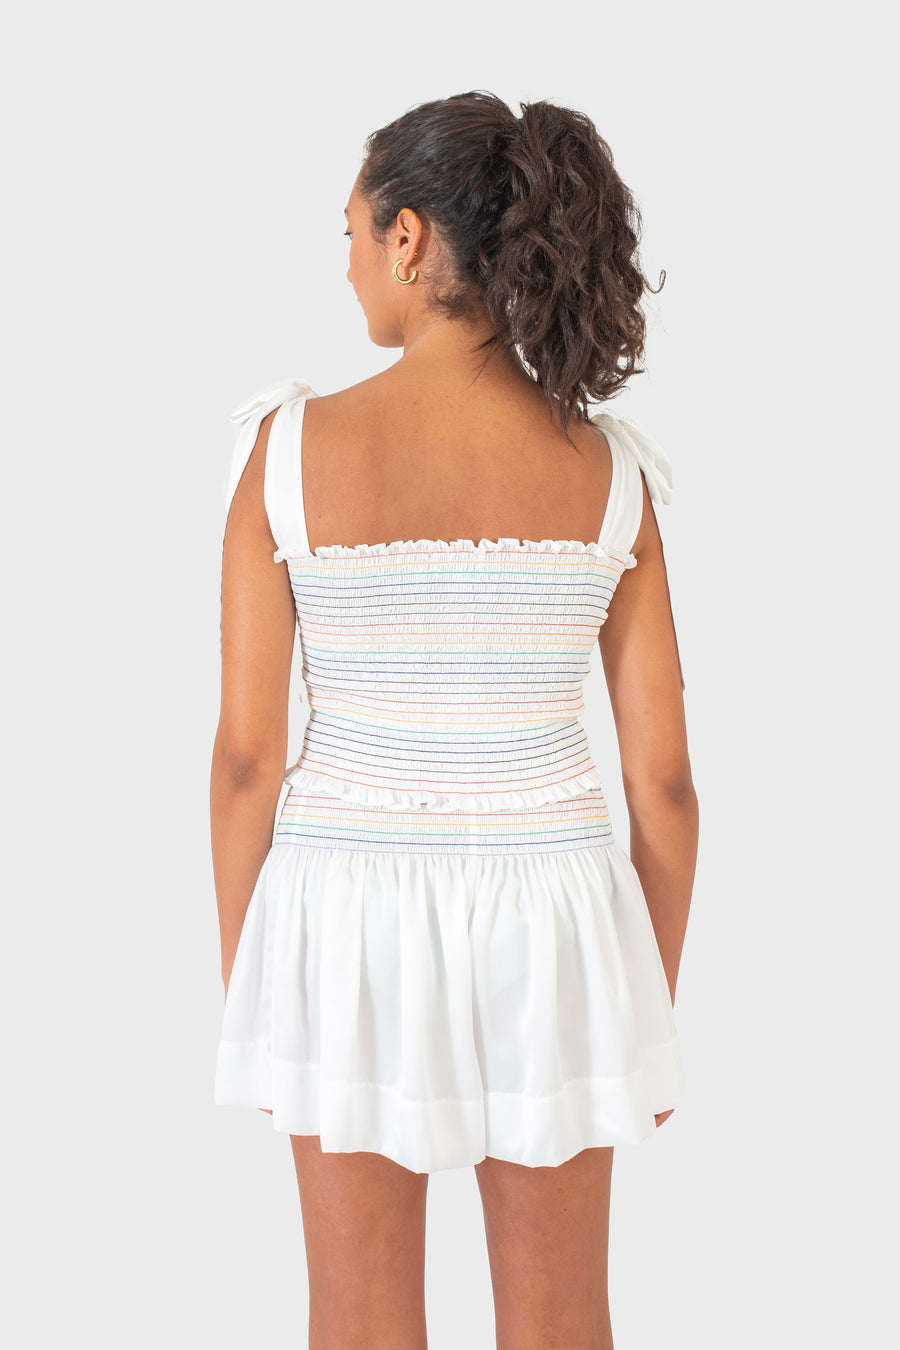 Cece Top White Rainbow *Limited*Edition*